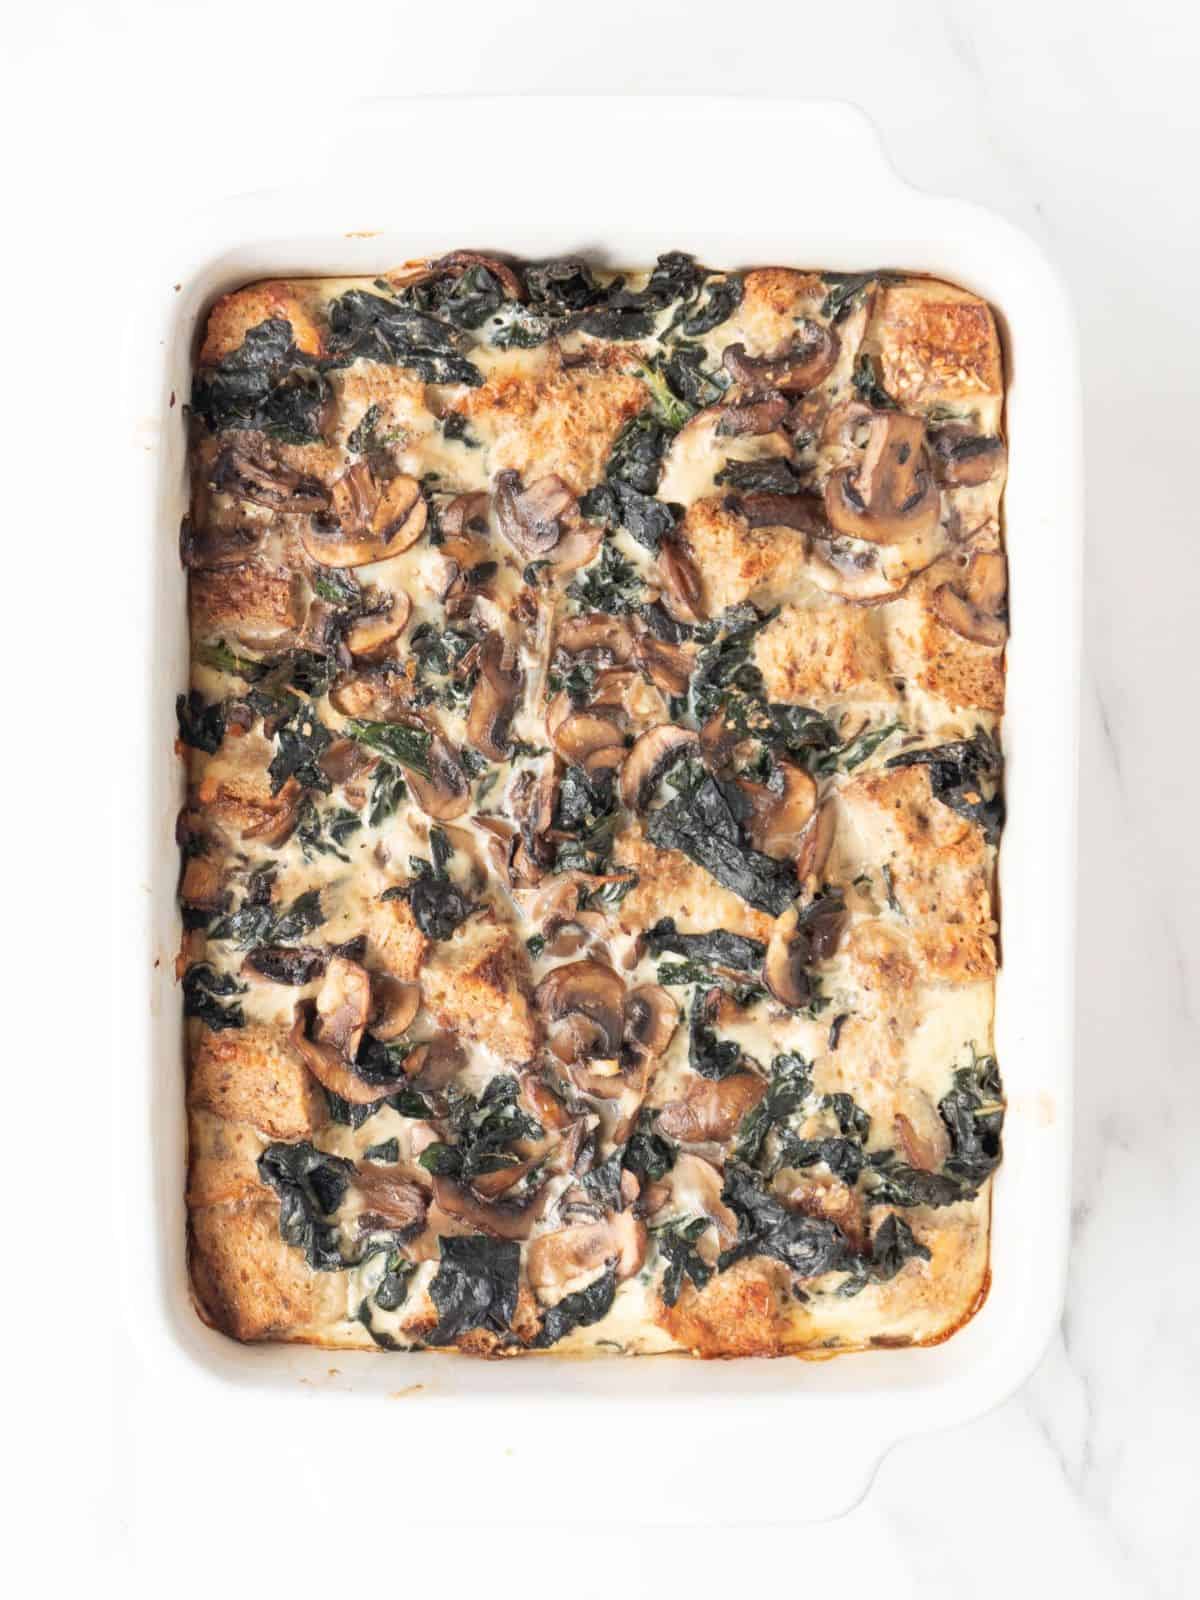 A white rectangular baking dish with freshly baked kale and mushroom bread pudding.